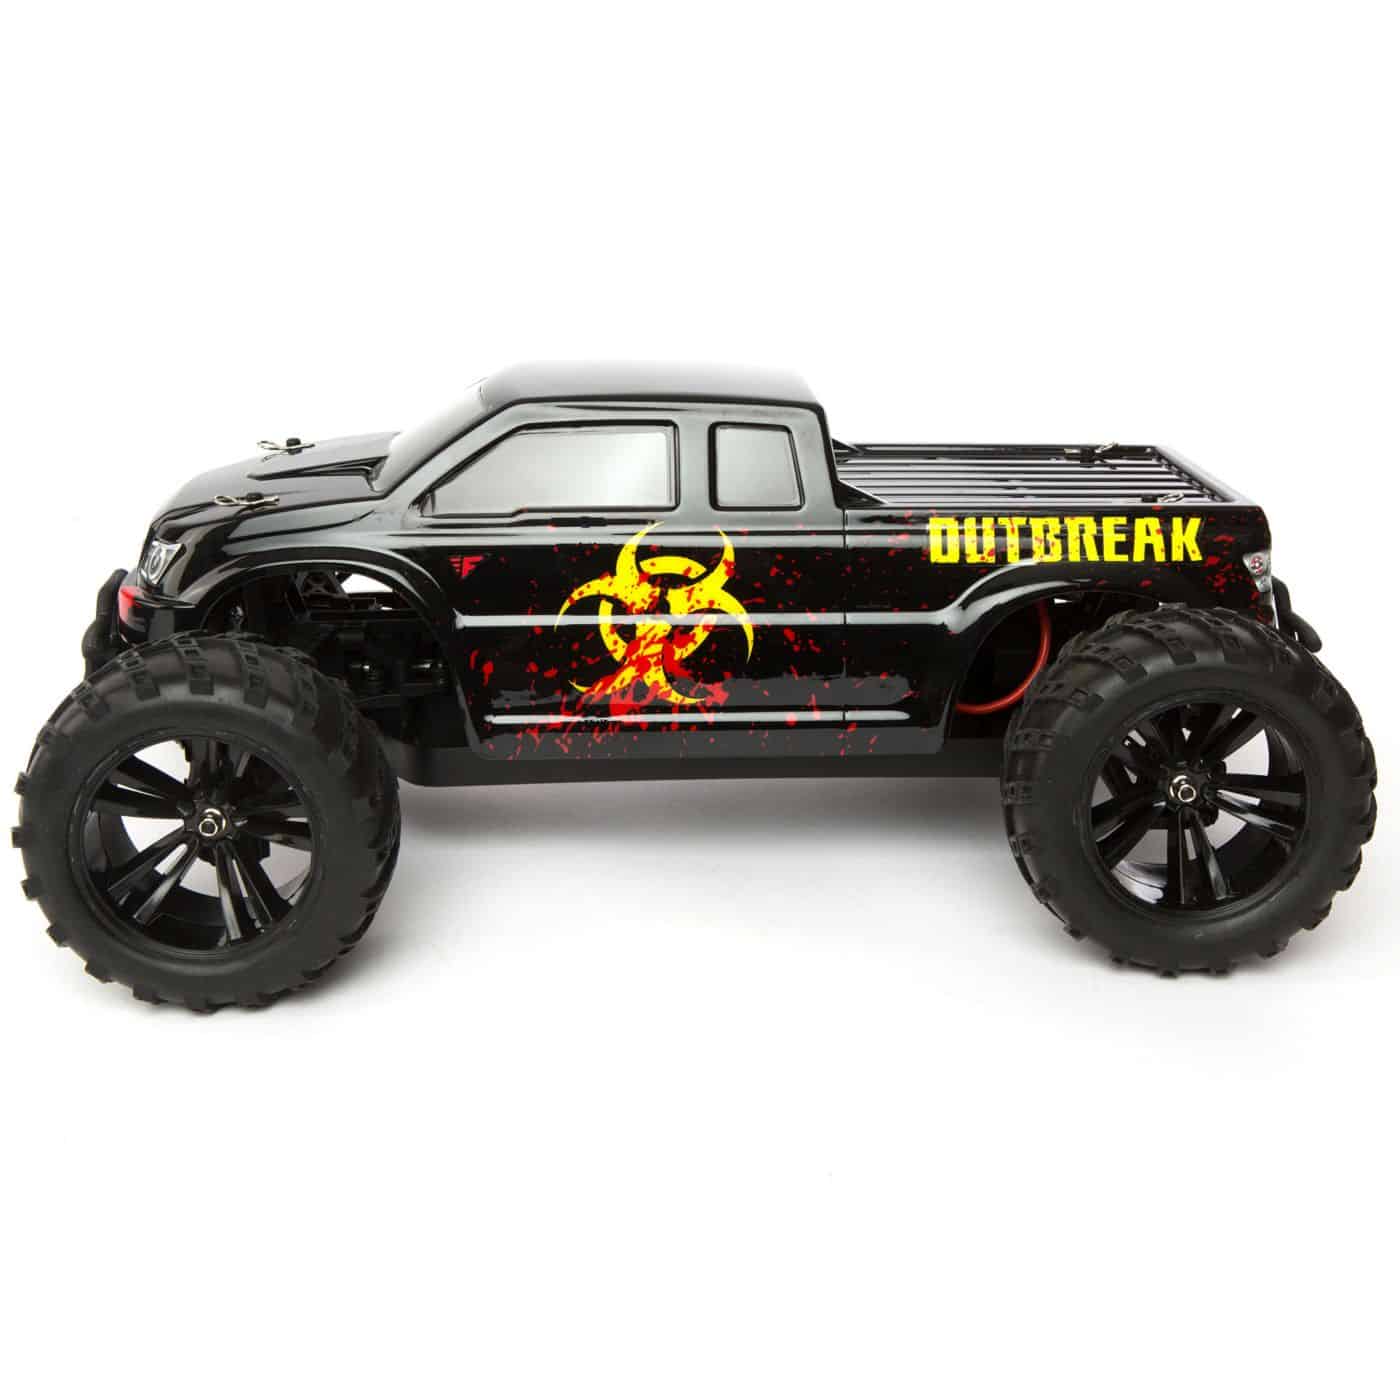 Force RC Outbreak RC Monster Truck - Side